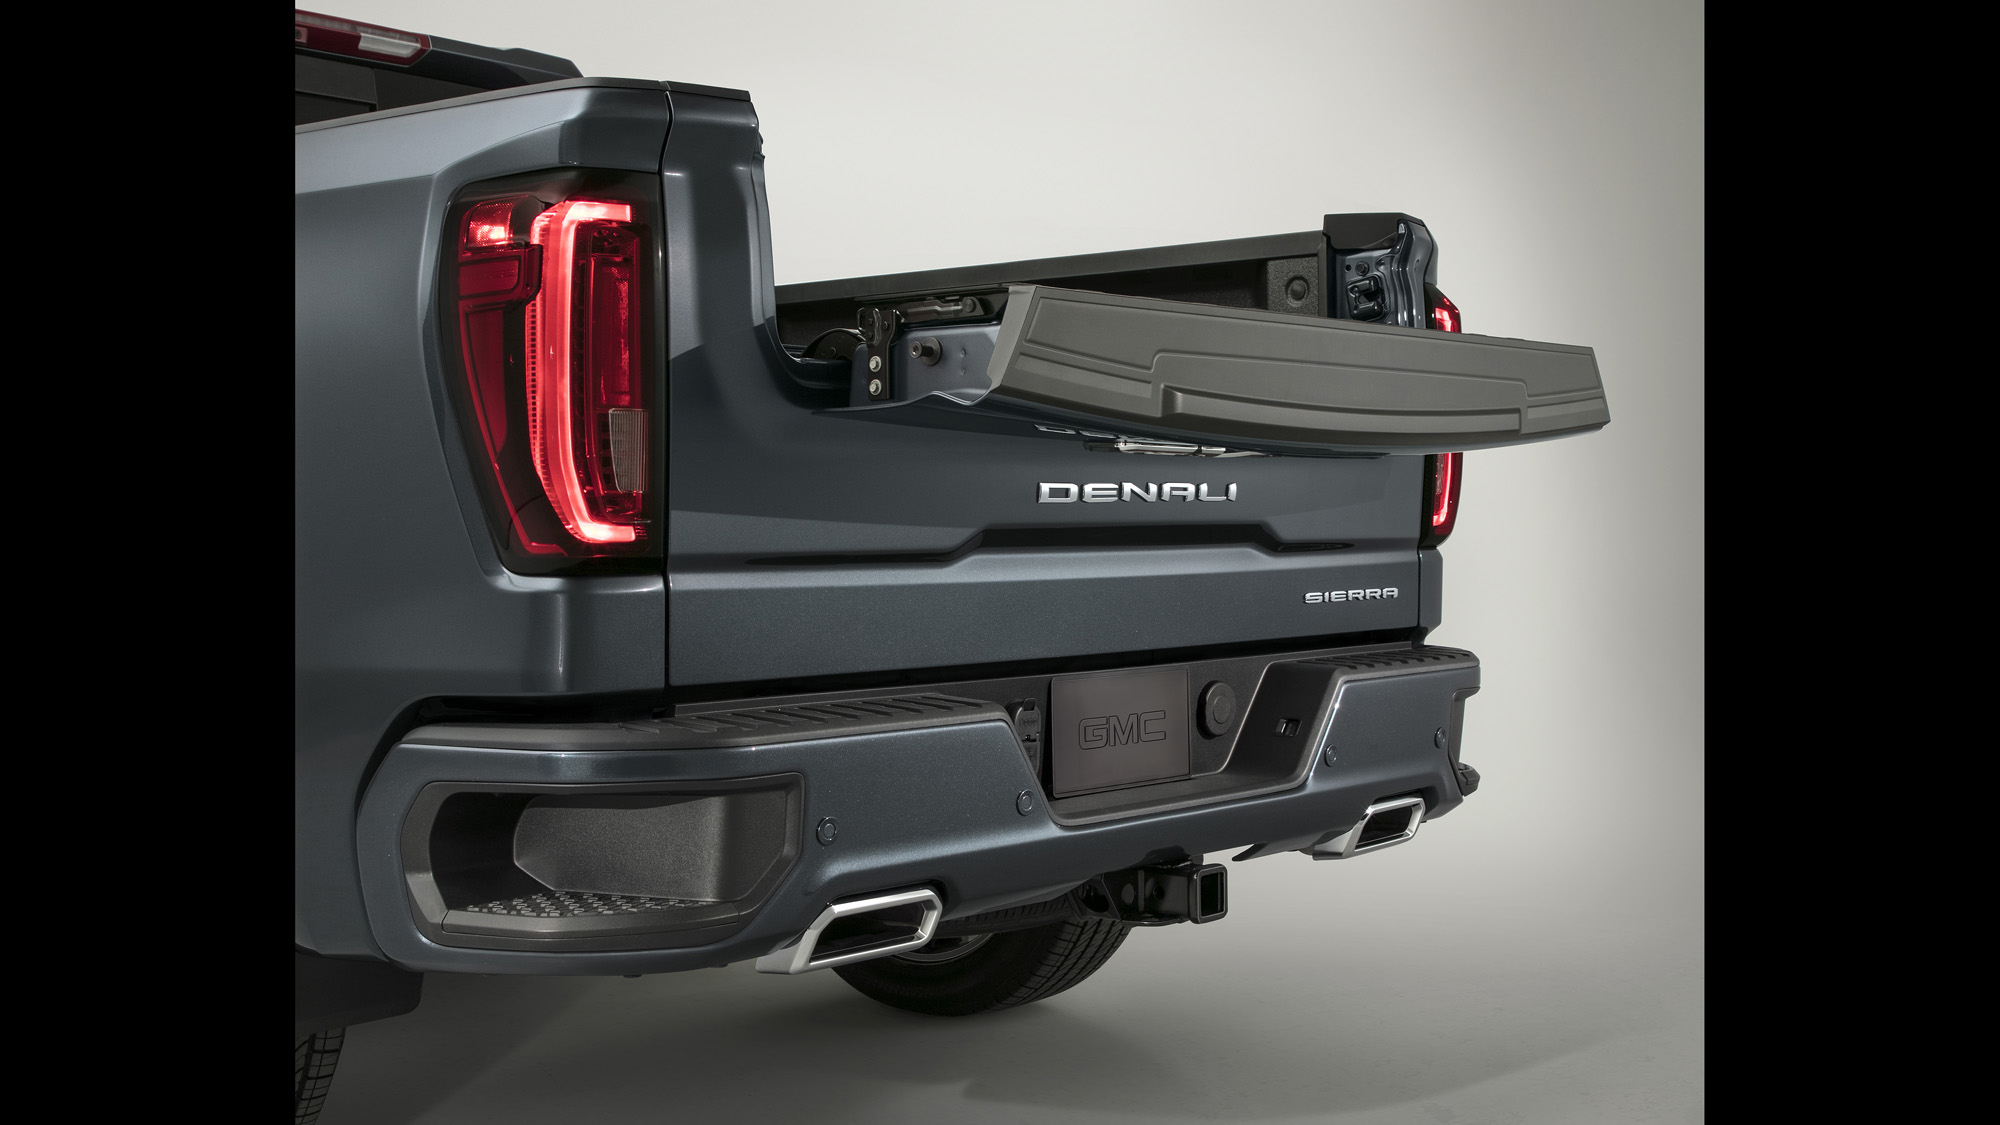 2019 GMC Sierra Denali MultiPro tailgate, inner gate with work surface configuration